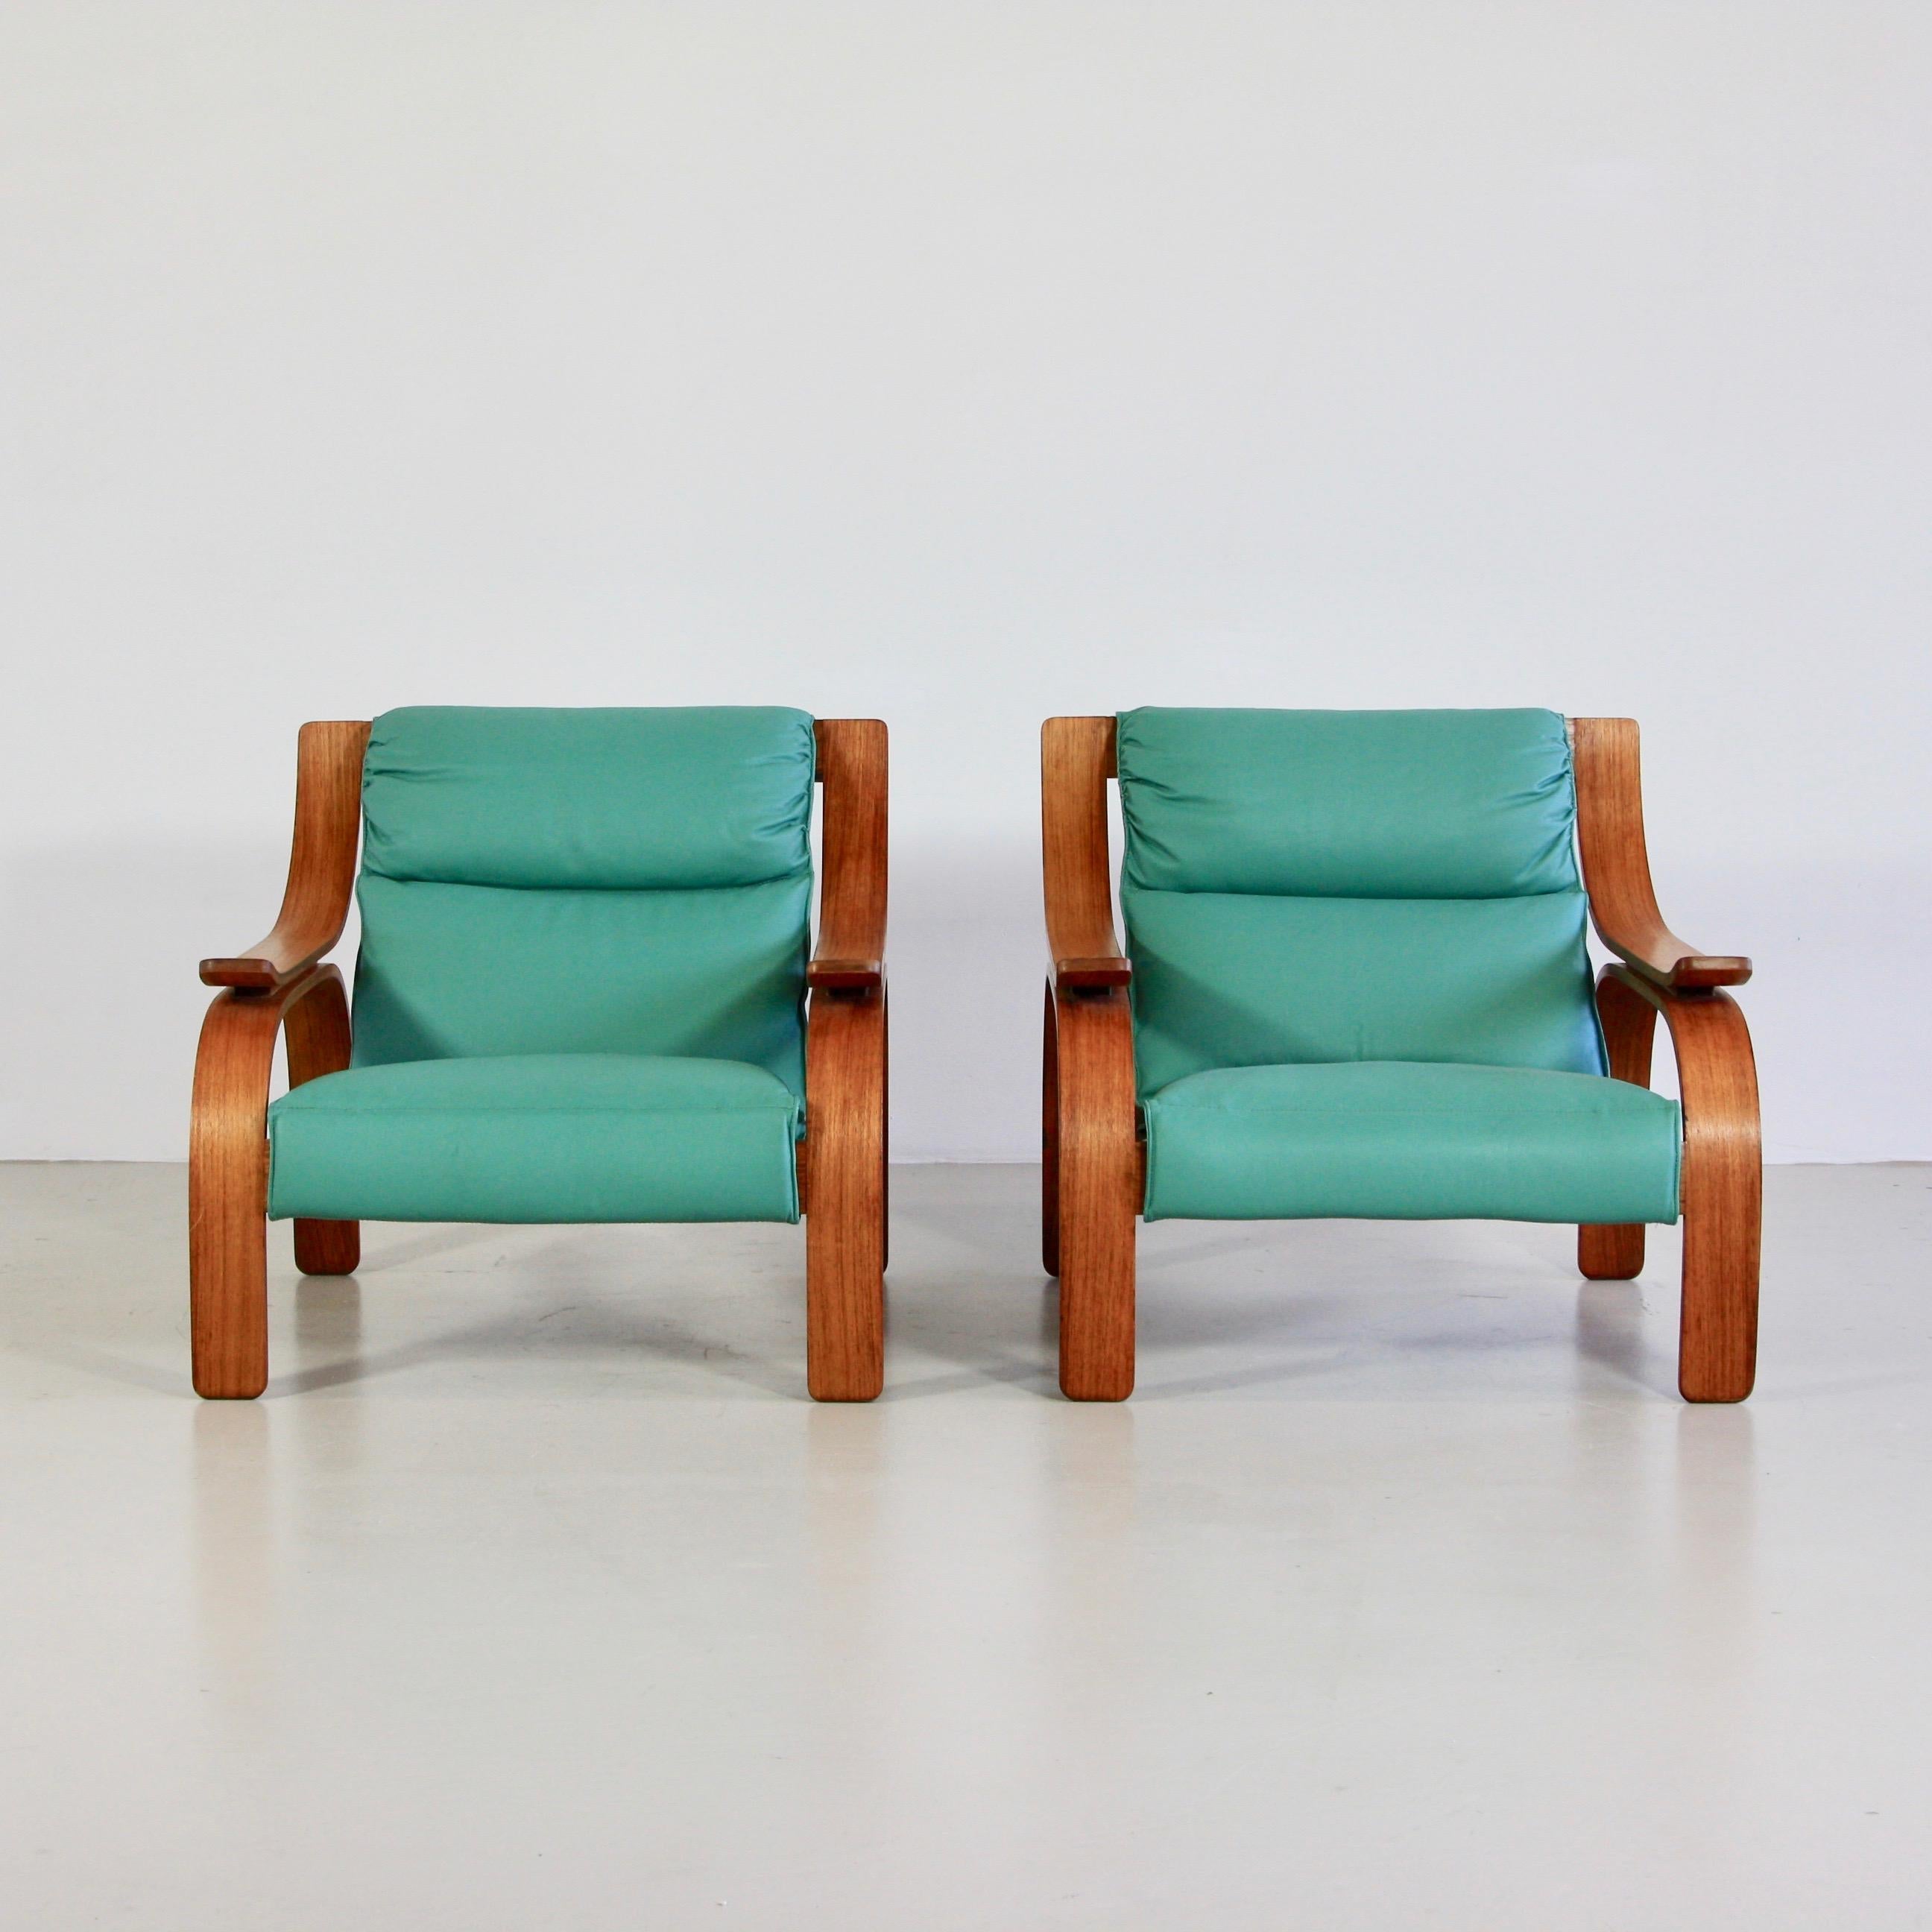 Mid-20th Century Pair of Green Leather Armchairs by Marco Zanuso, 1964 For Sale